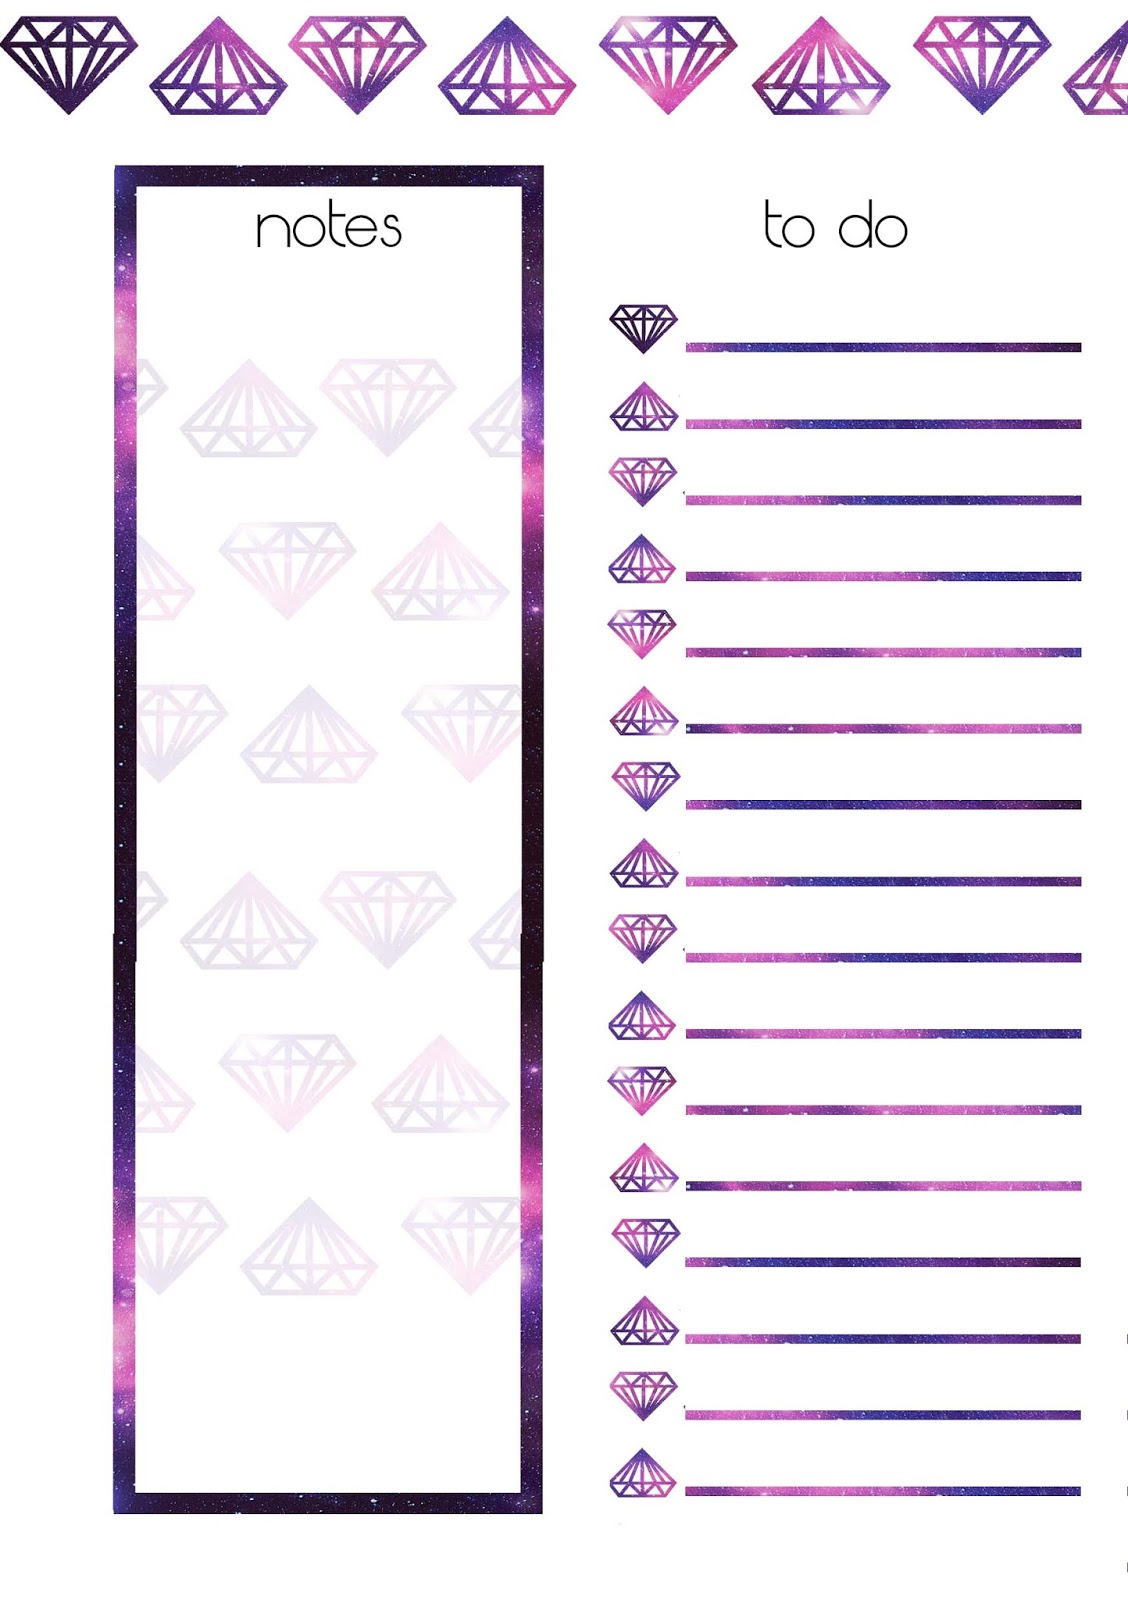 pb-and-j-studio-free-printable-planner-inserts-galaxy-diamond-week-on-2-pages-a5-a6